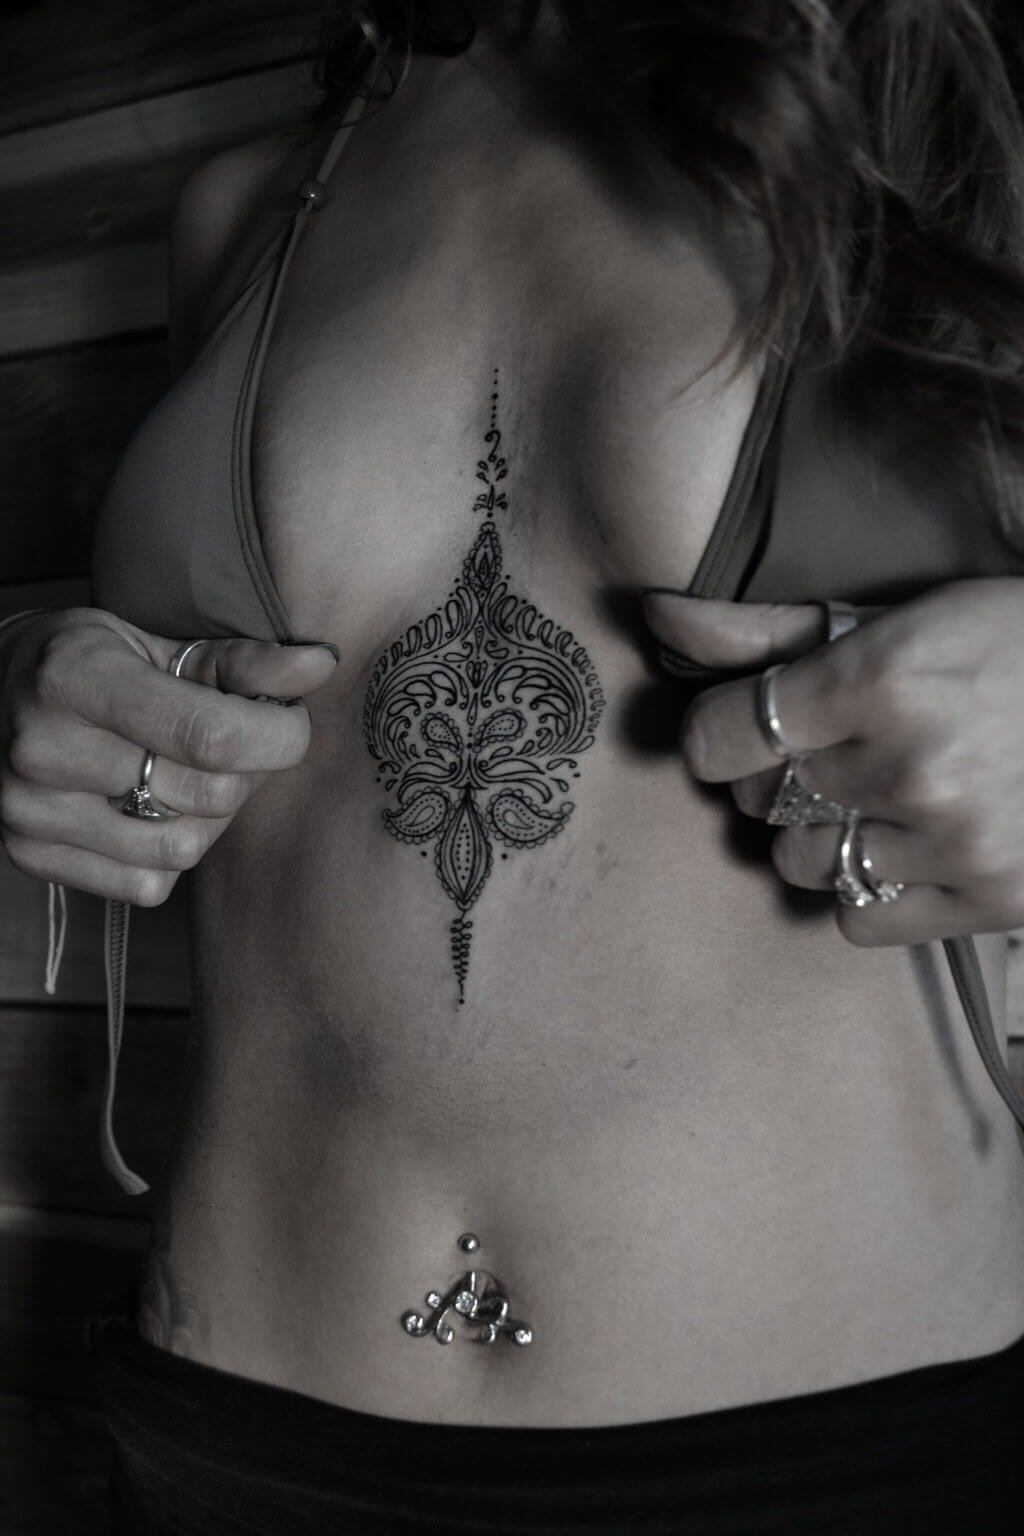 Between Breast Tattoo Meaning: Personal Stories and Symbolism Behind Body Art